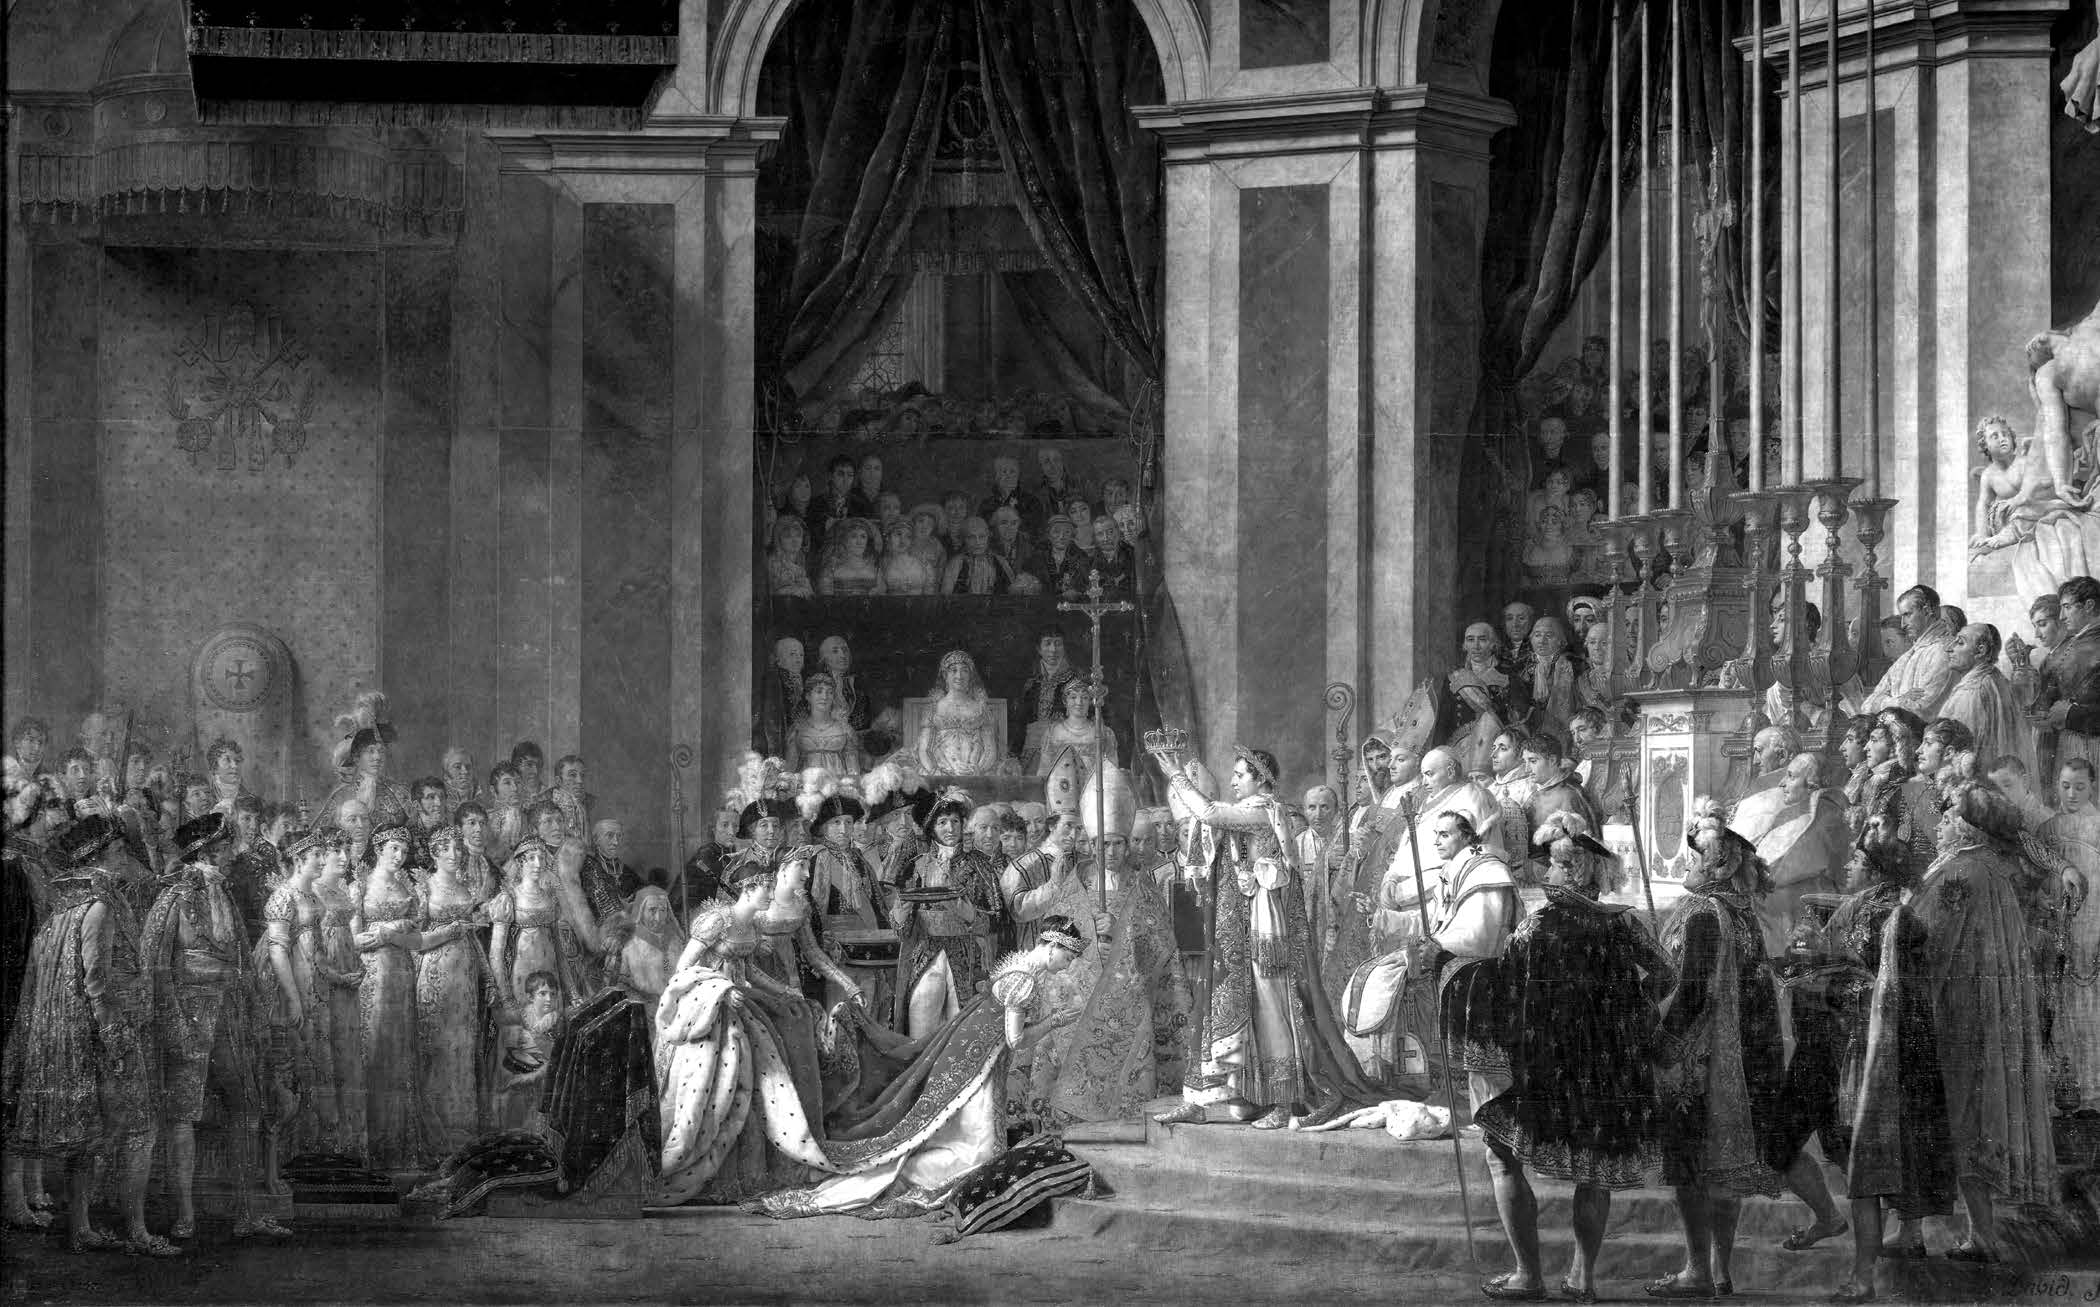 The Coronation of Napoleon, by Jacques-Louis David.